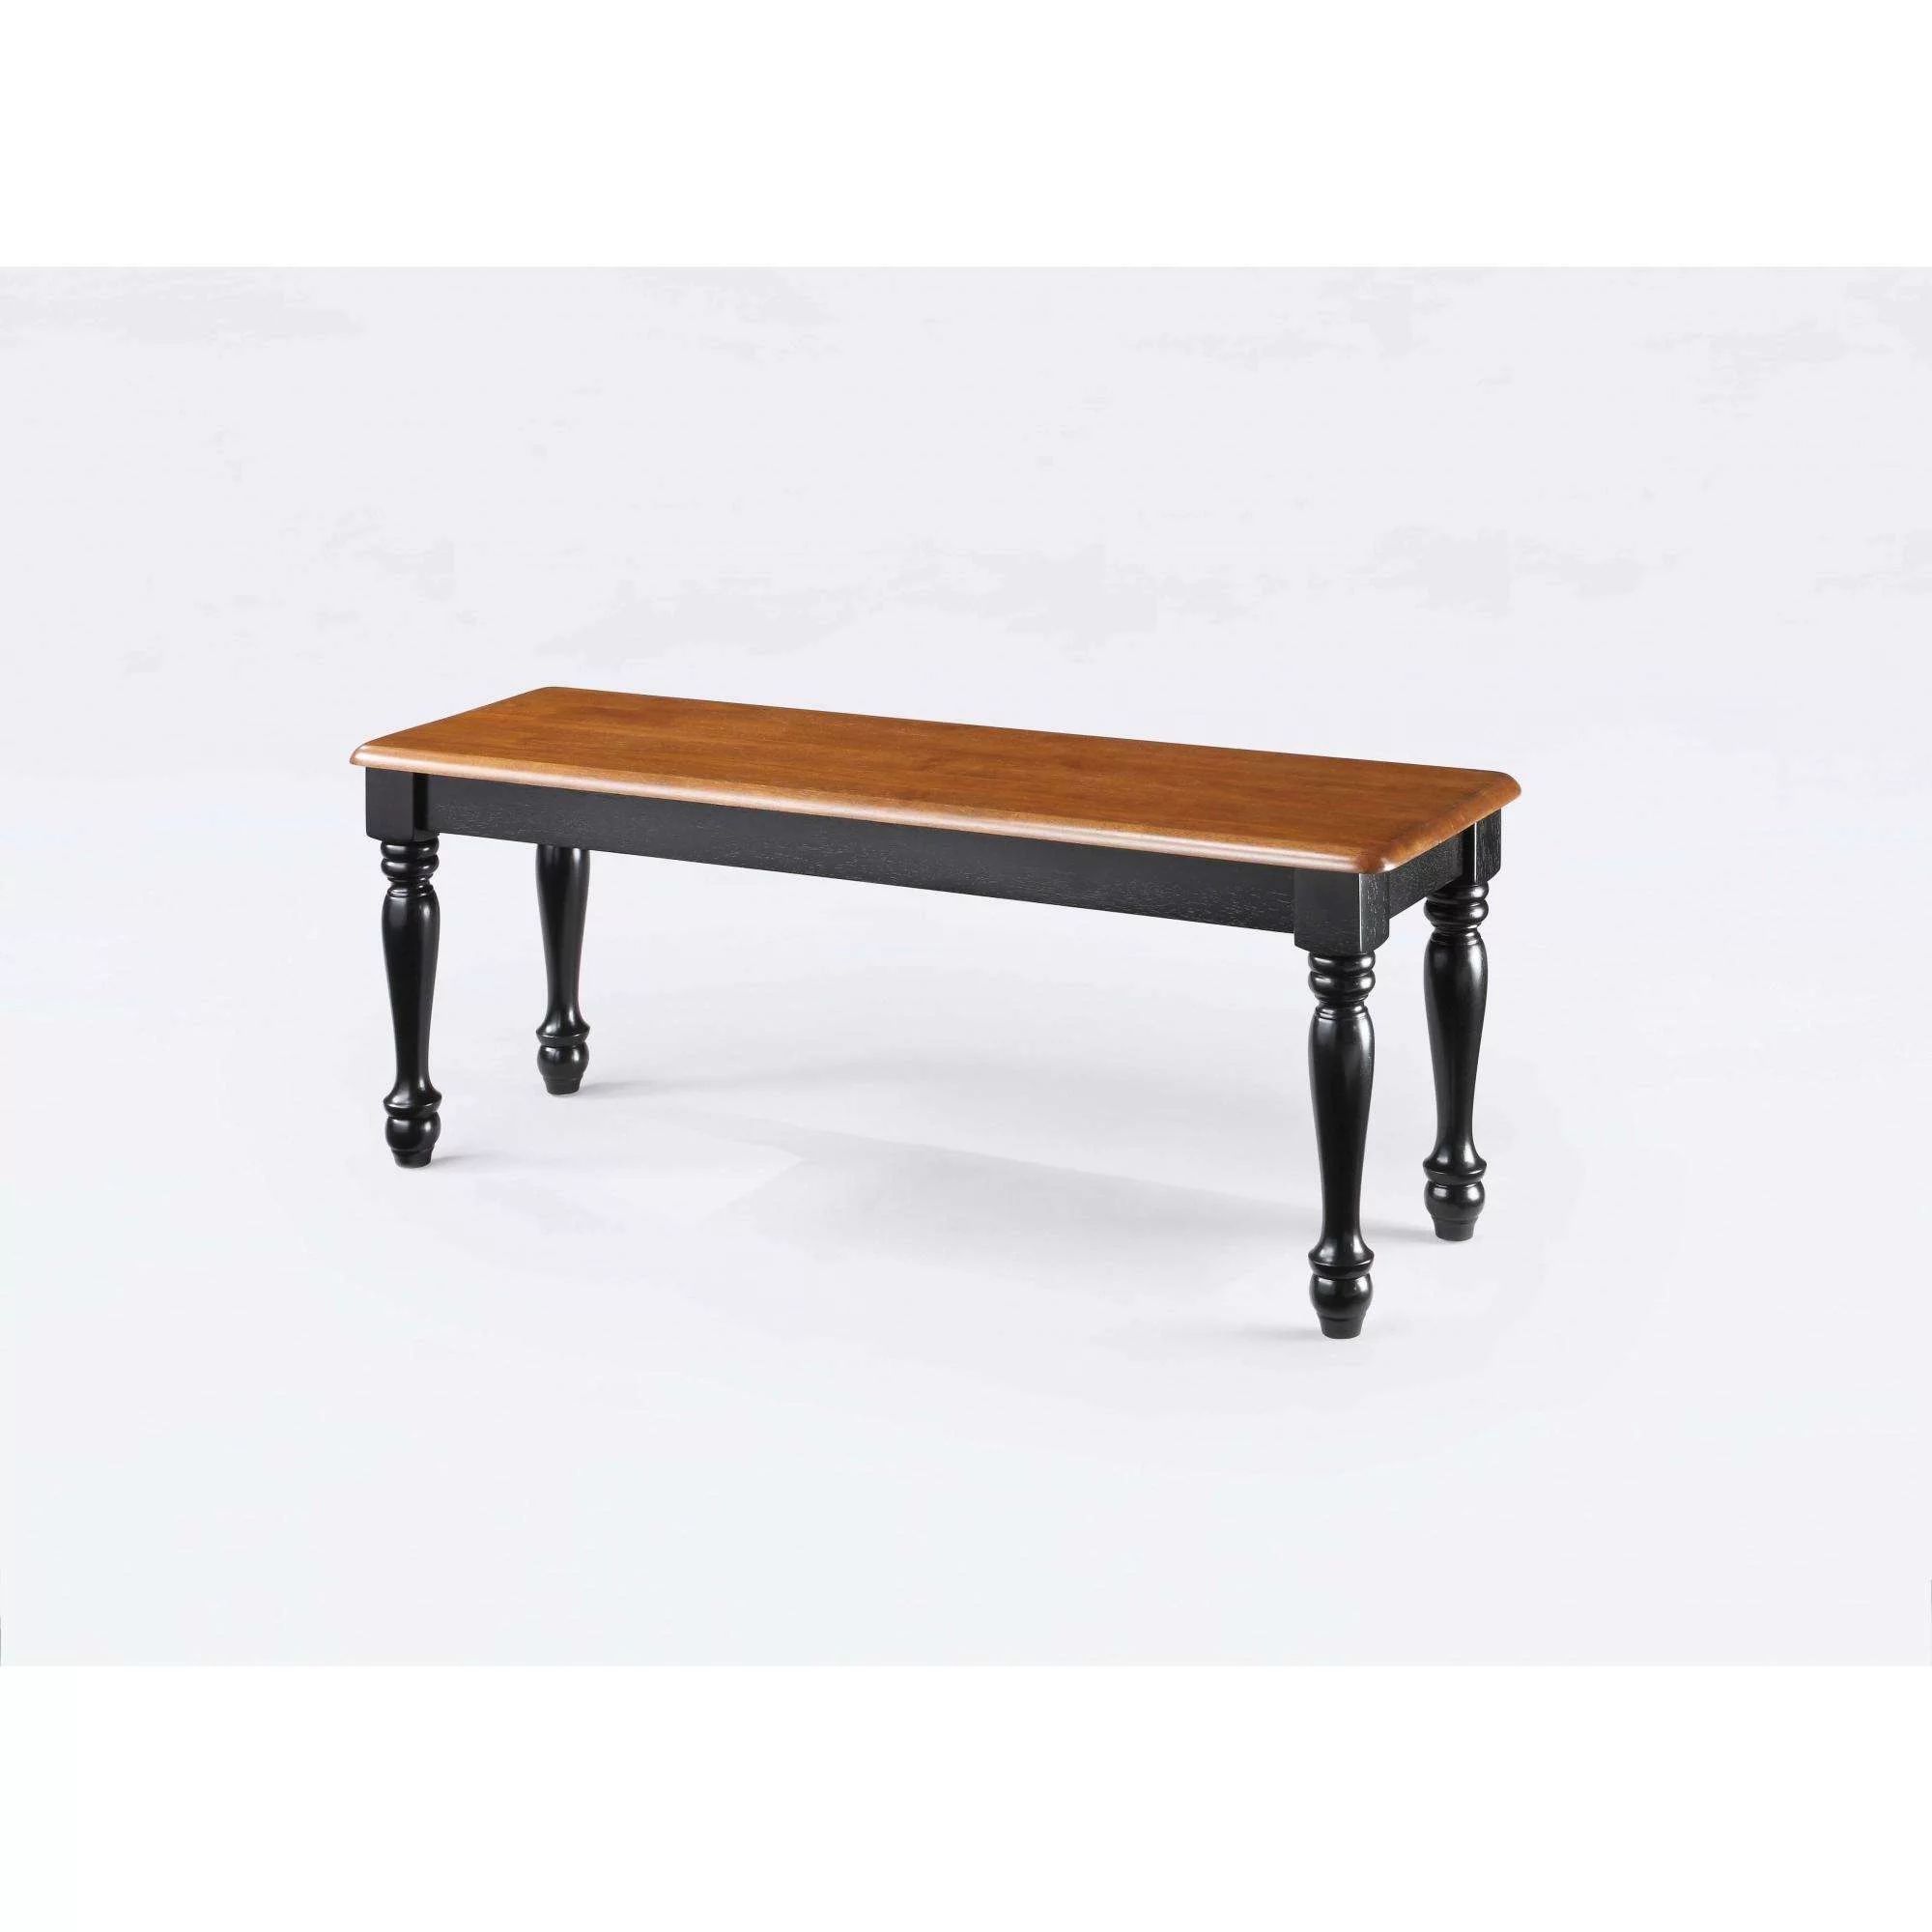 Better Homes & Gardens Autumn Lane Farmhouse Solid Wood Dining Bench, Black and Natural Finish | Walmart (US)